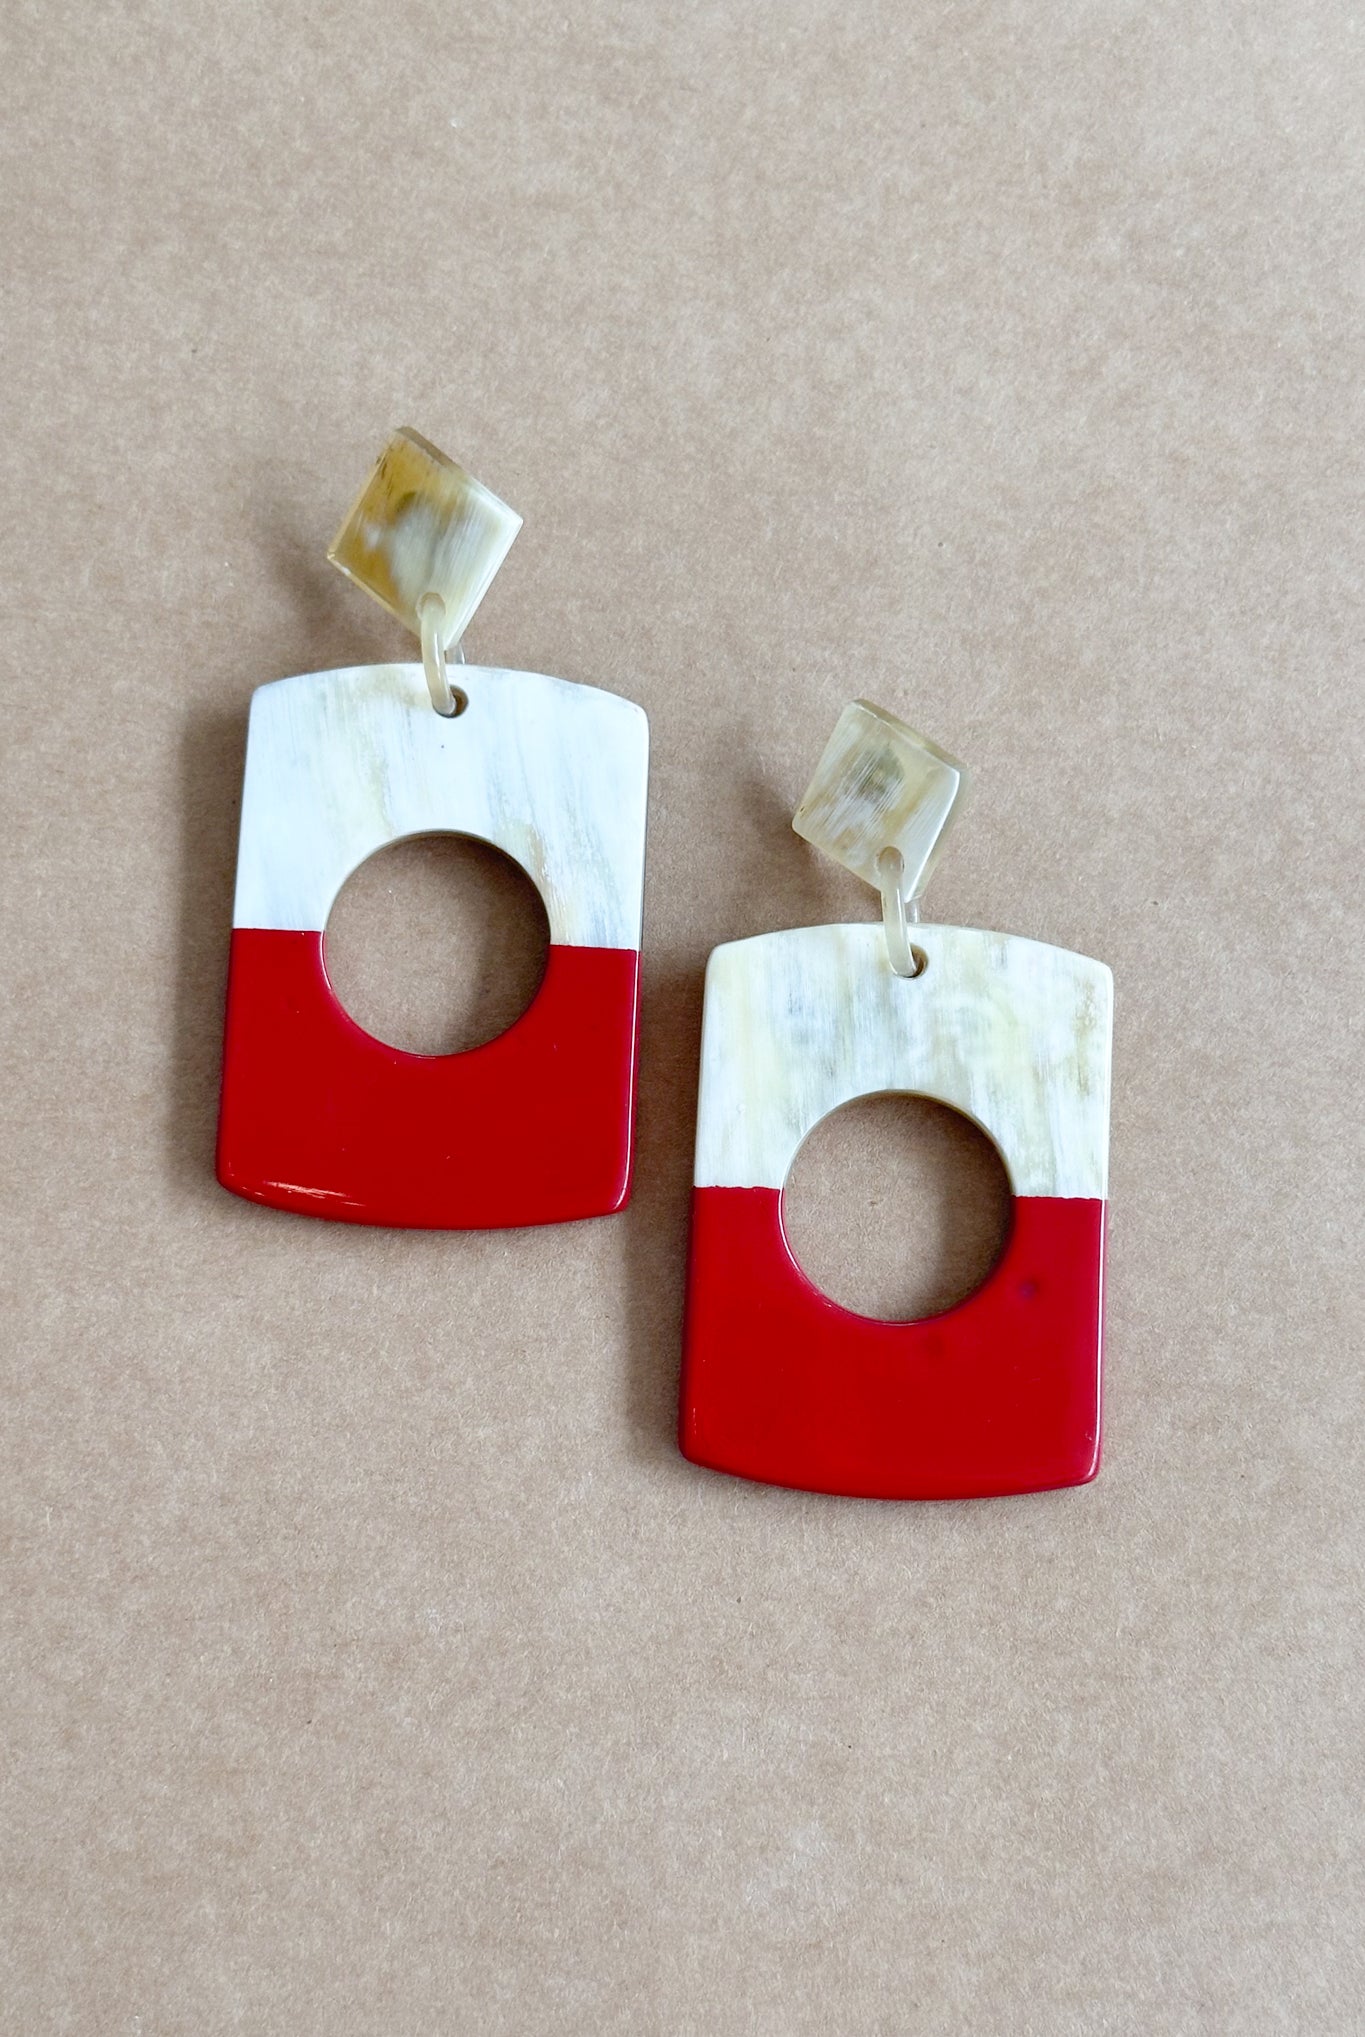 OOH LA LA Red Graphic Earrings - Magpie Style